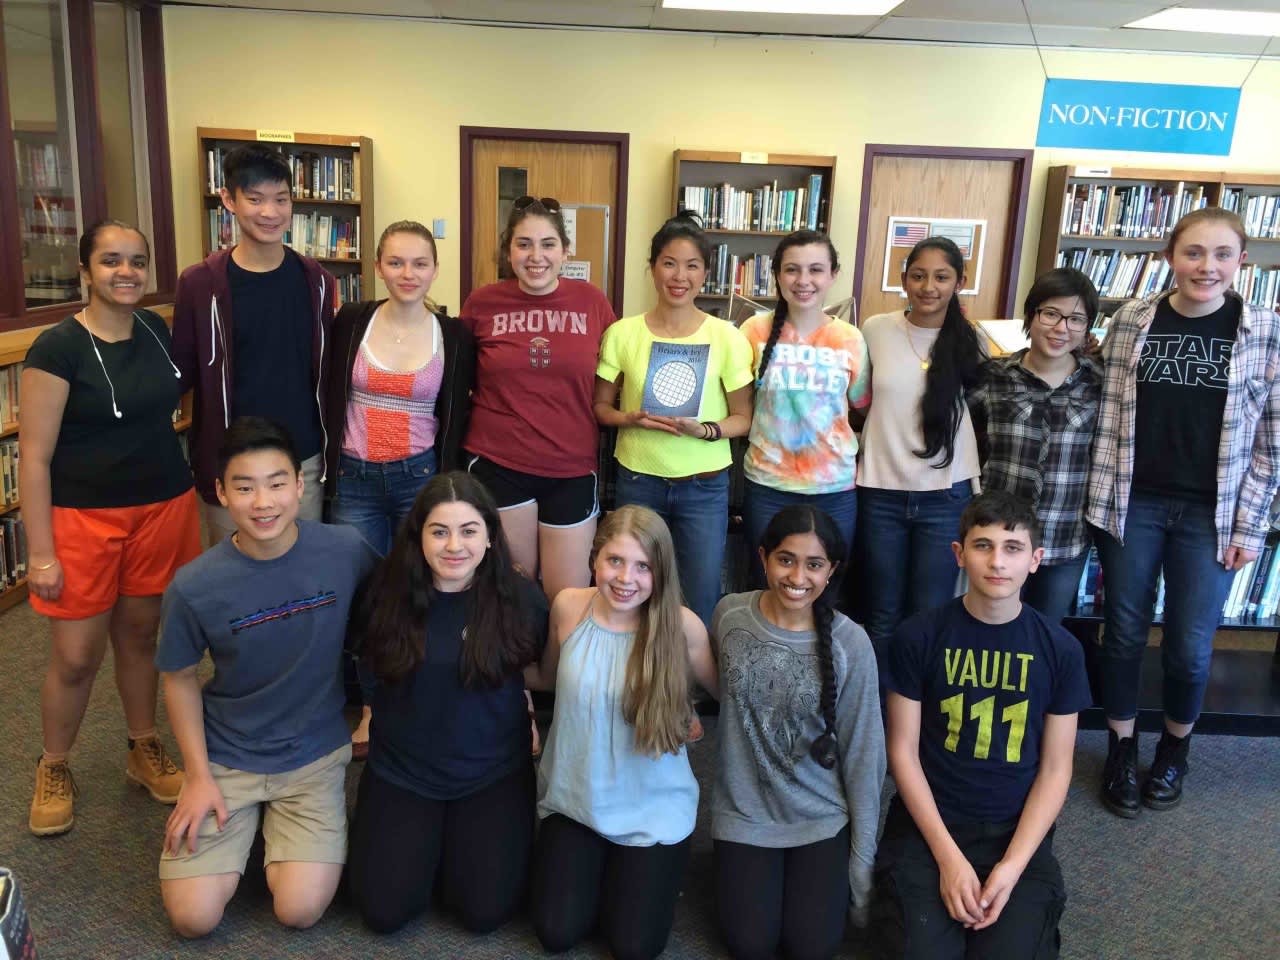 Briarcliff High School’s 2015 literary magazine, Briars & Ivy, received top recognition from several national organizations.